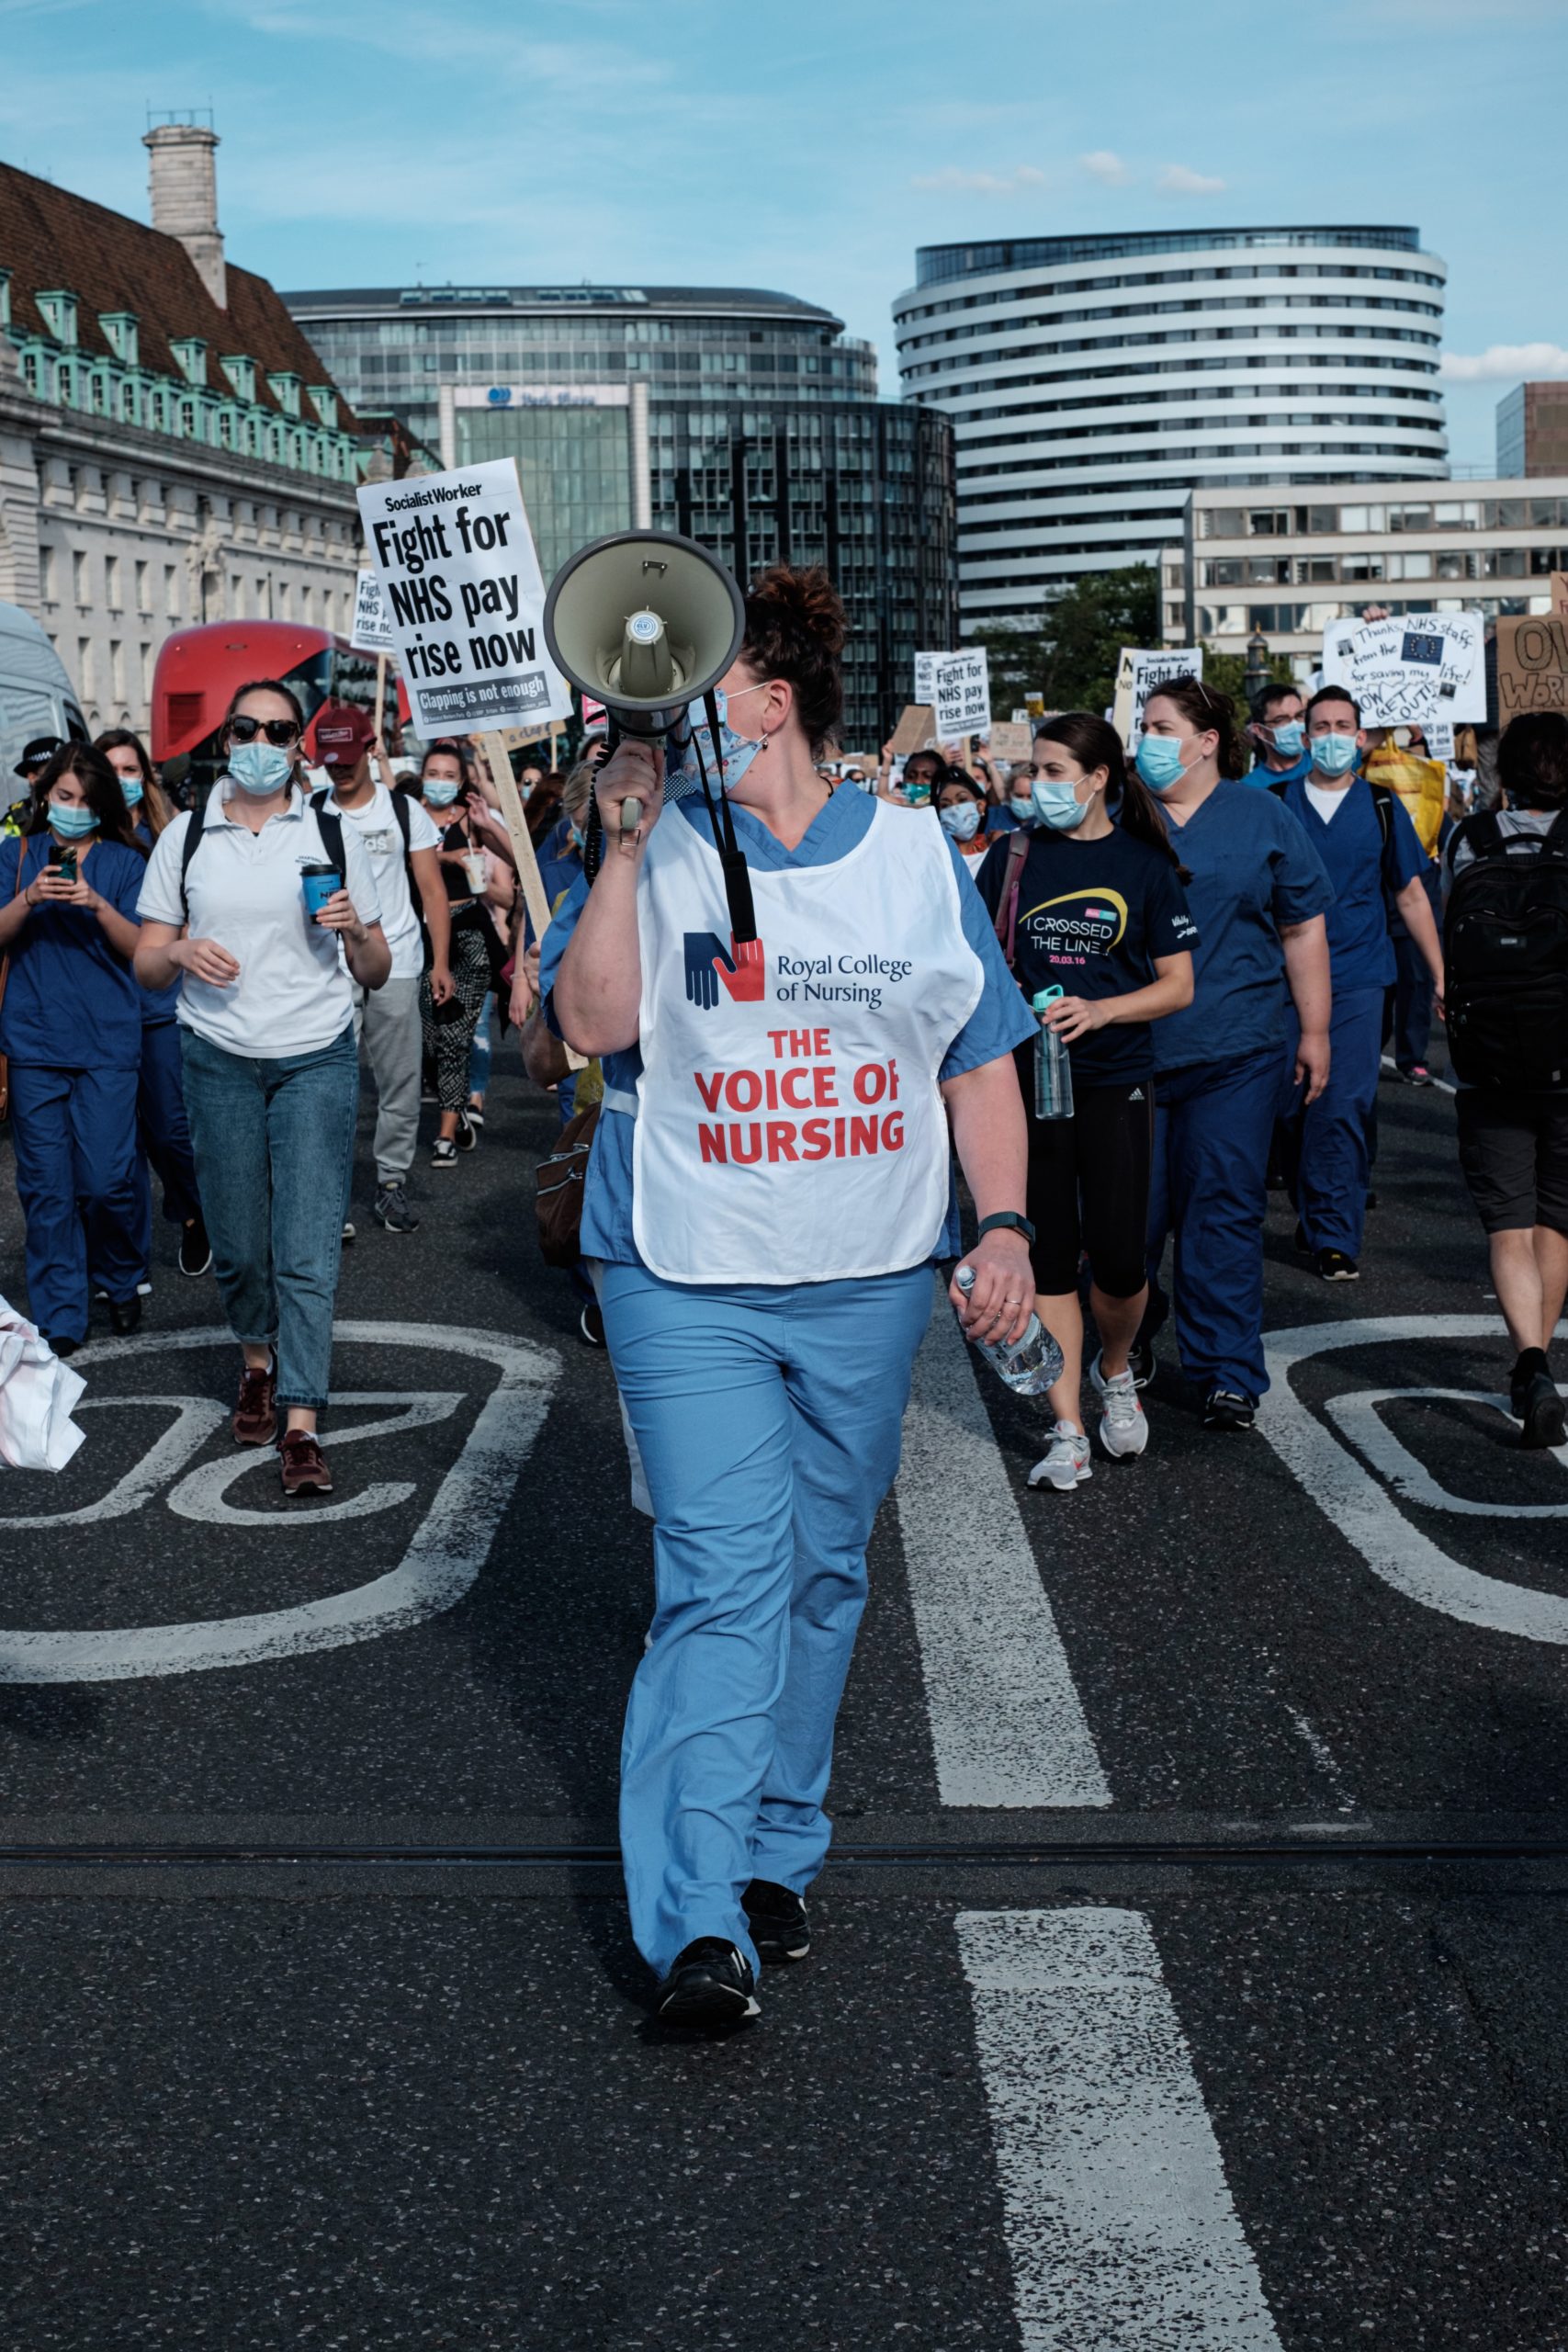 Joining a Nursing Union: Pros and Cons